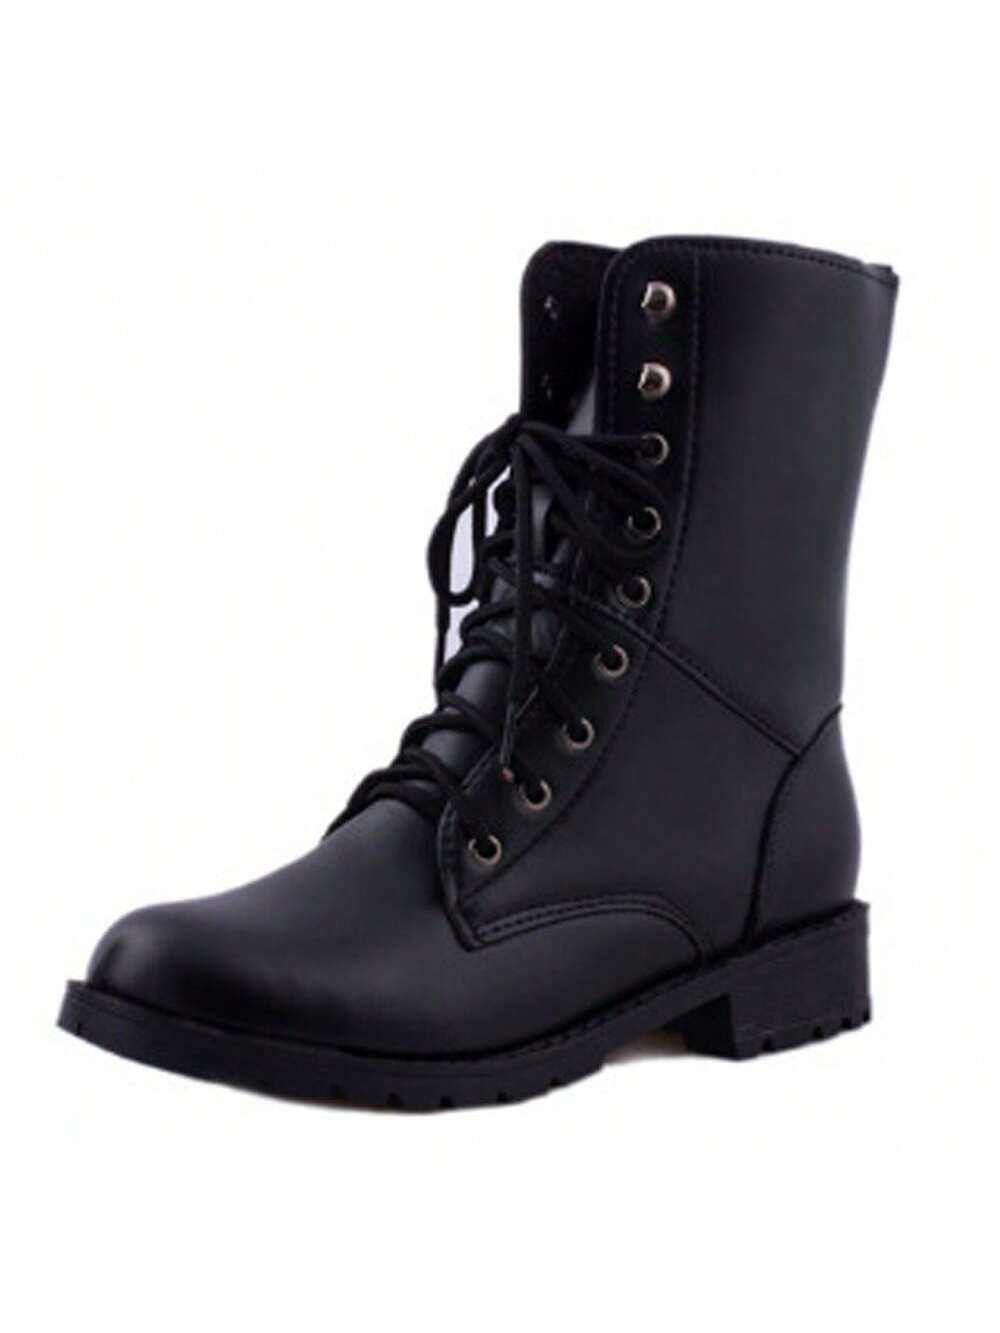 1 Pair Fashionable British-Style Mid-Heel Boots With Laces For Men And Women, Motorcycle Boots-Black-1